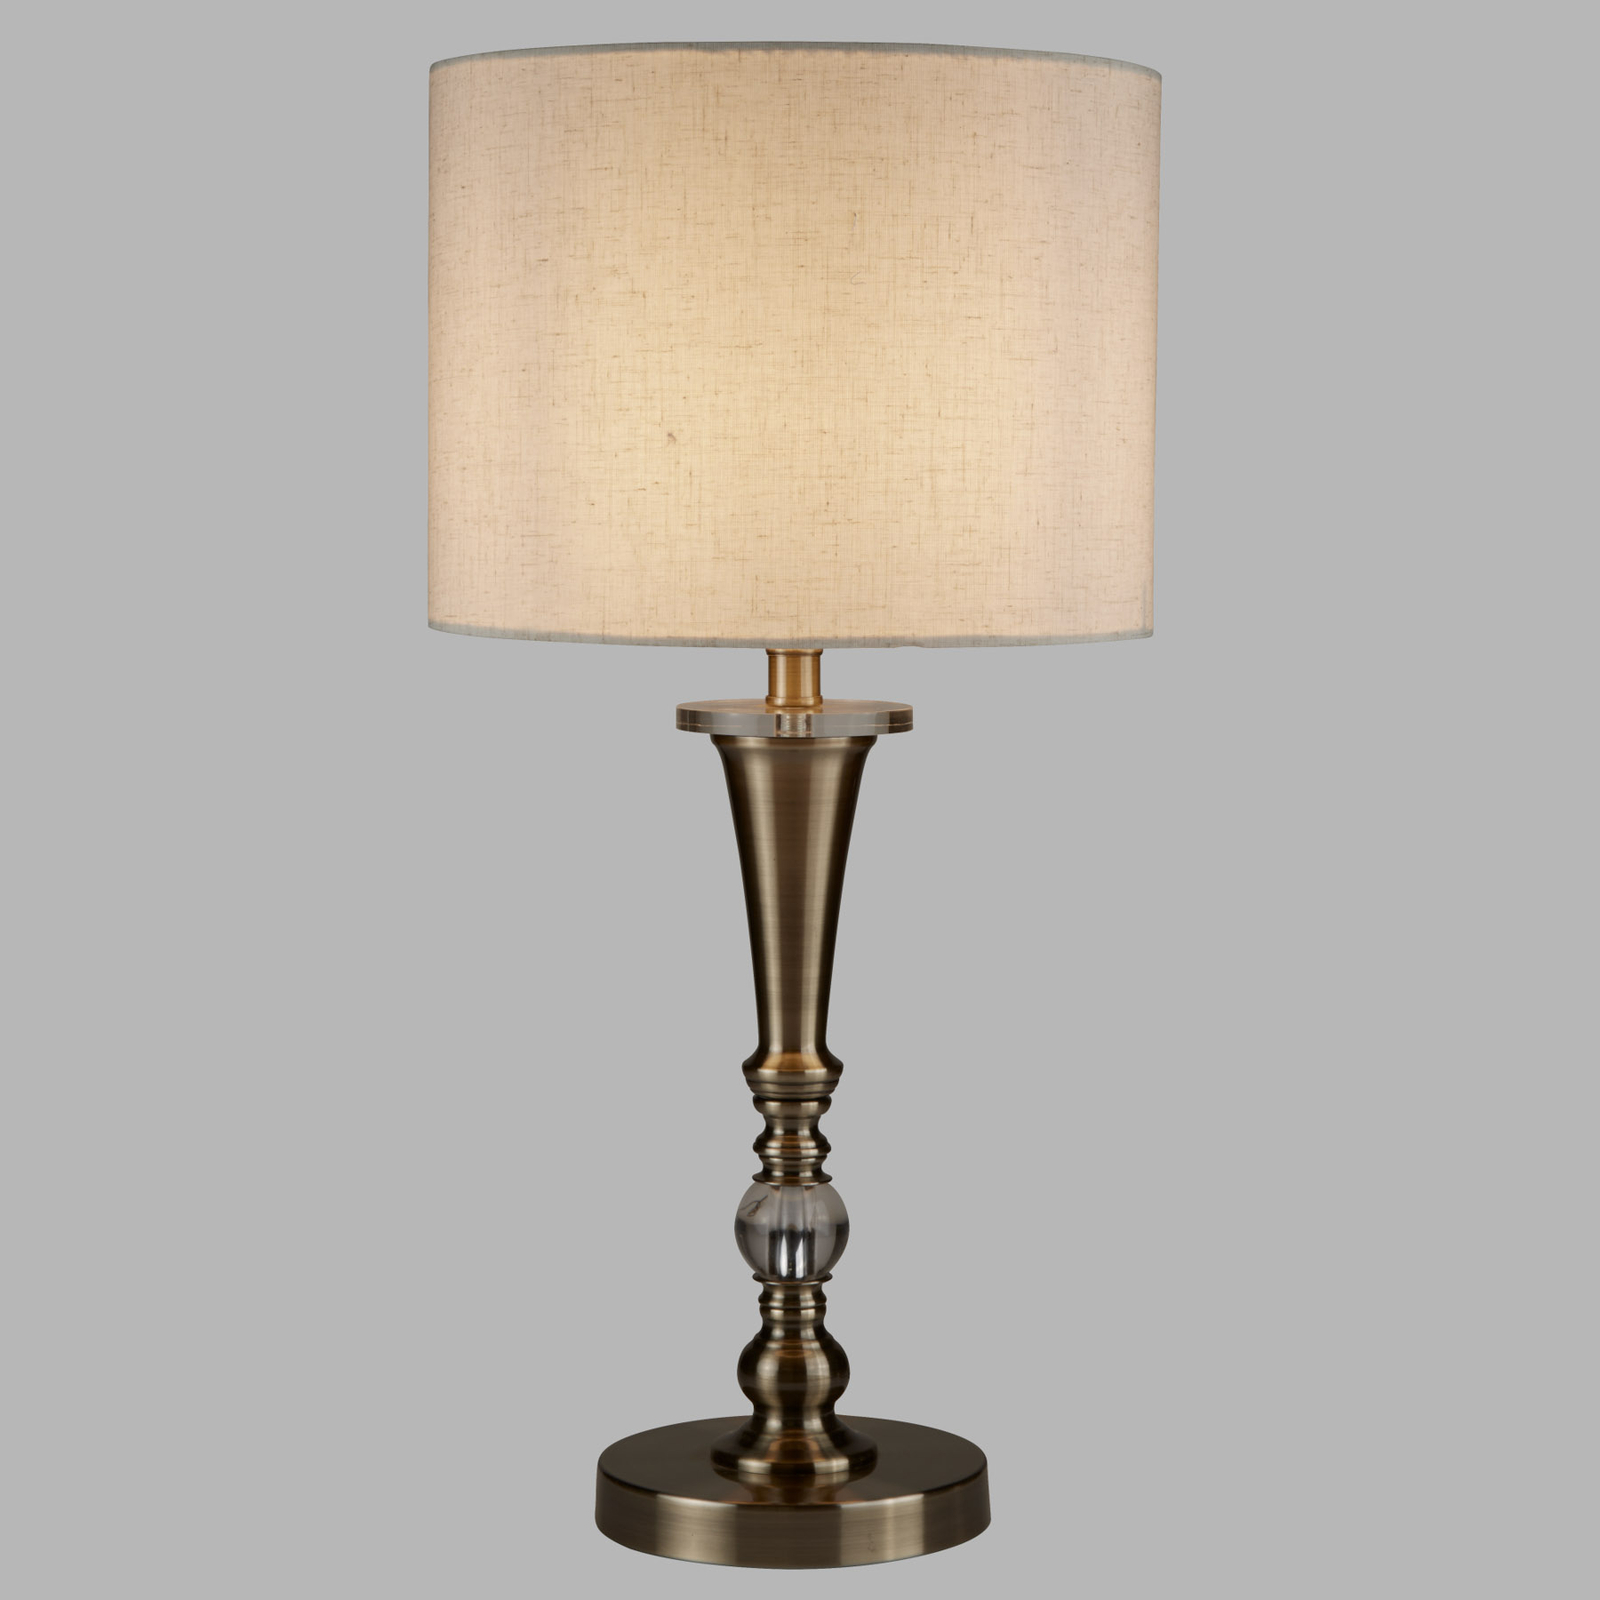 Oscar table lamp with a lampshade in a linen look